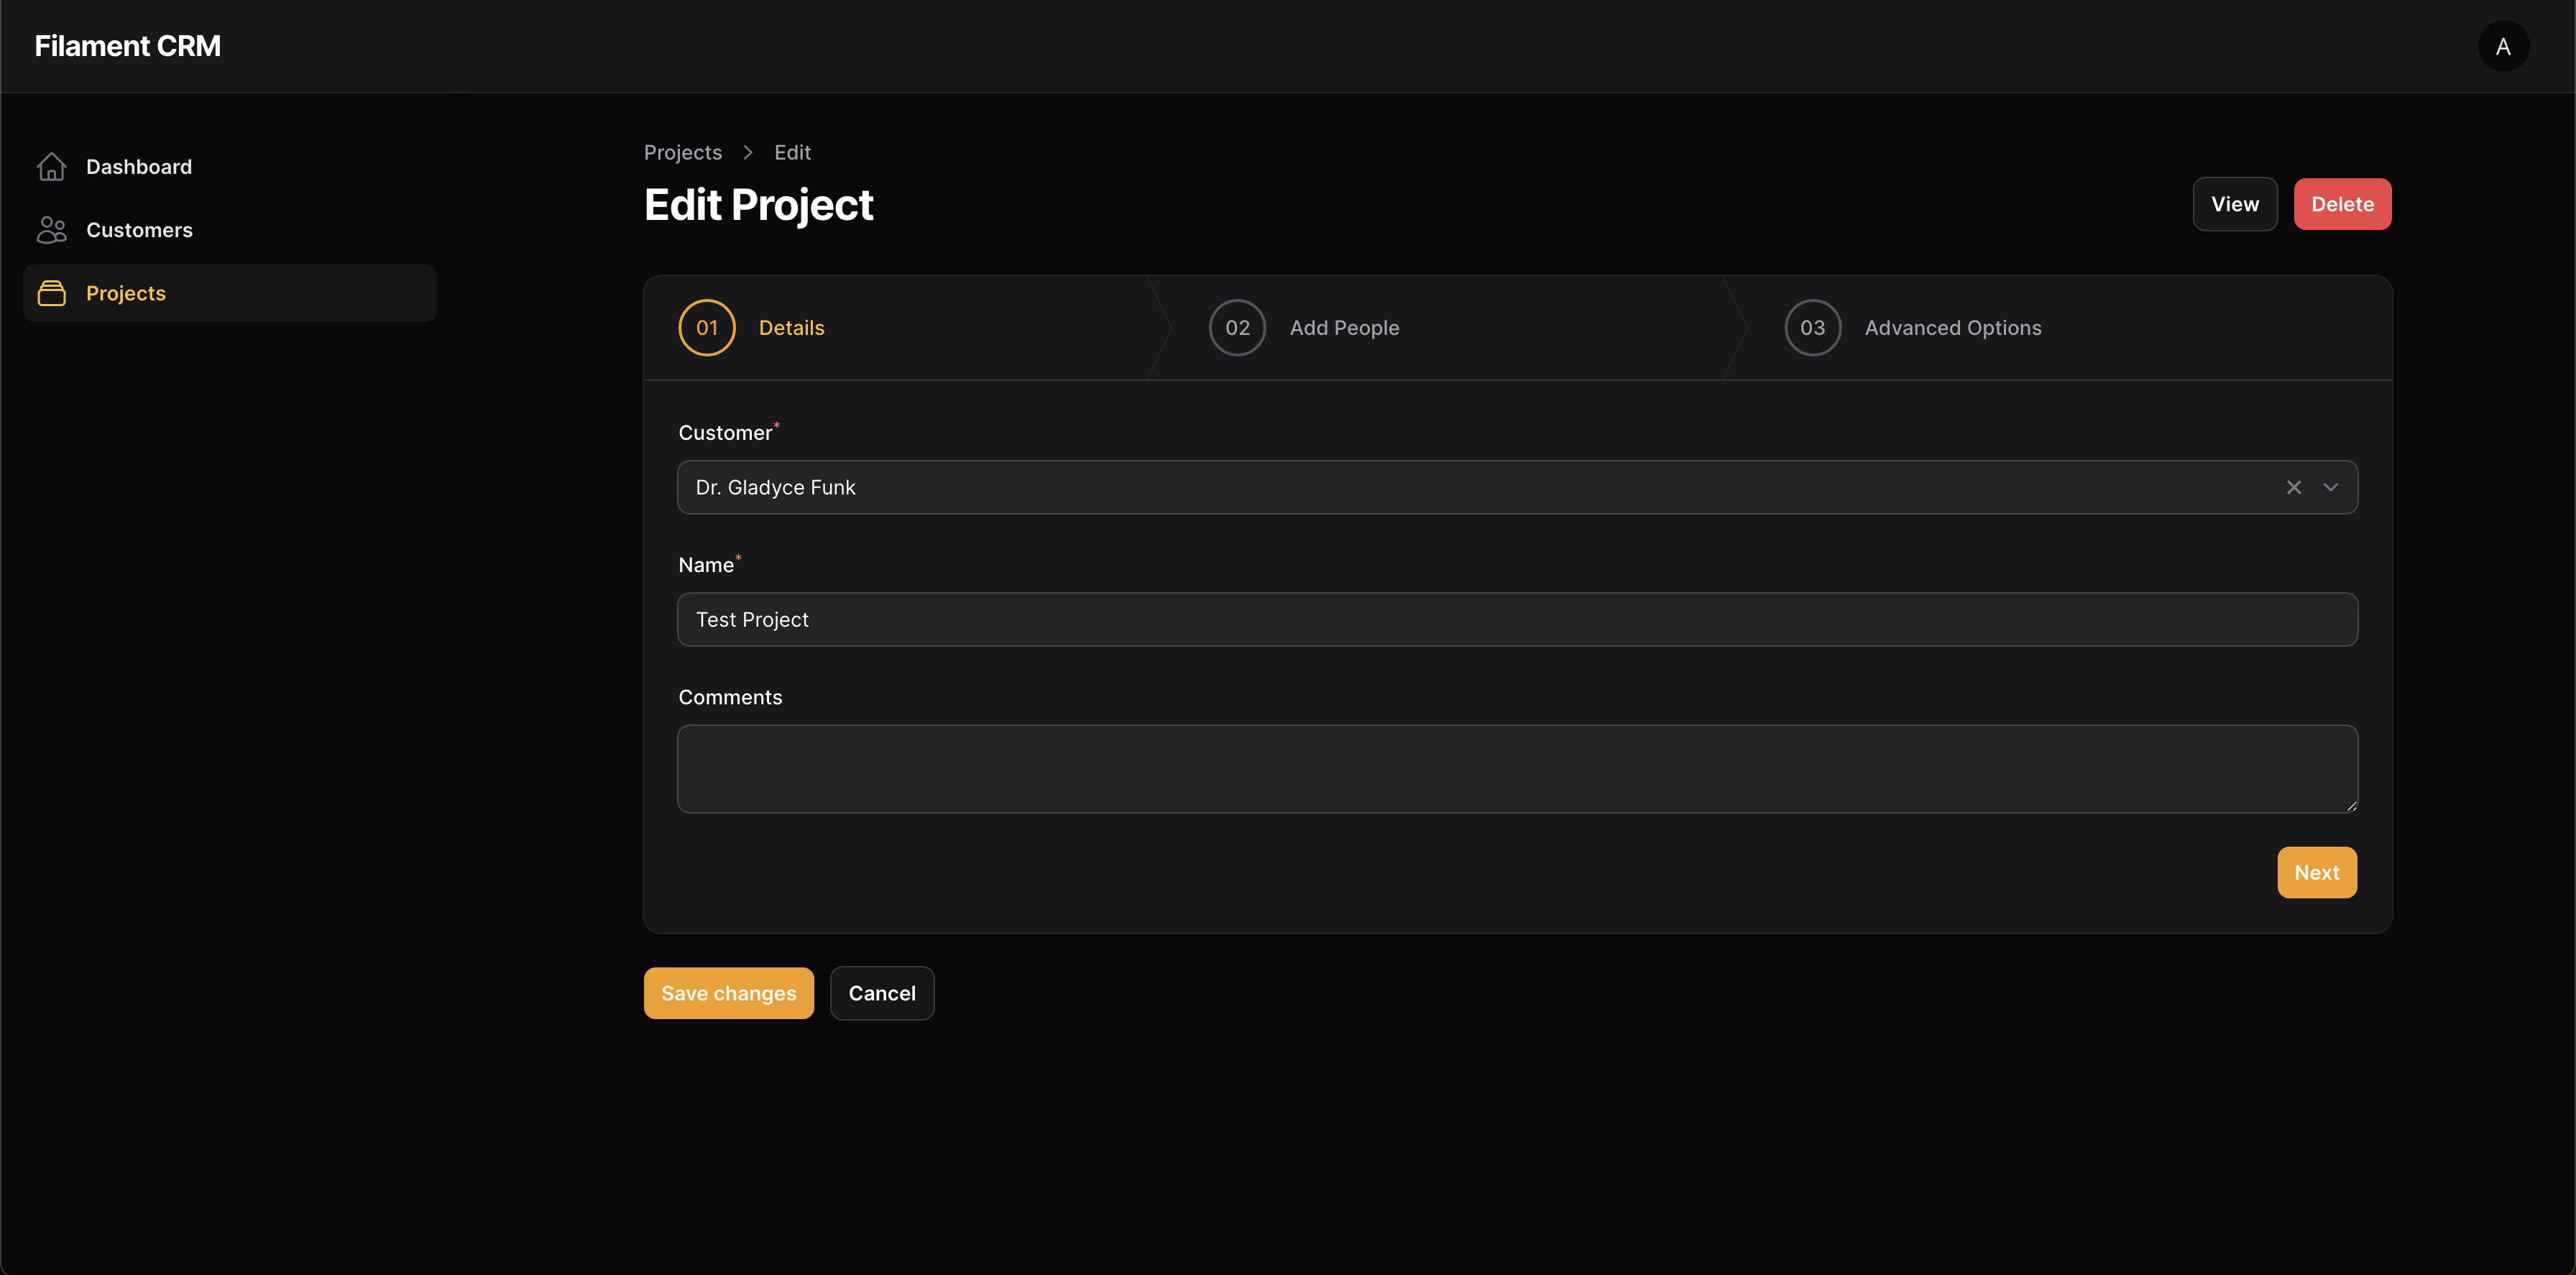 Building a CRM with Filament 3, Part 3: Projects - Post Image